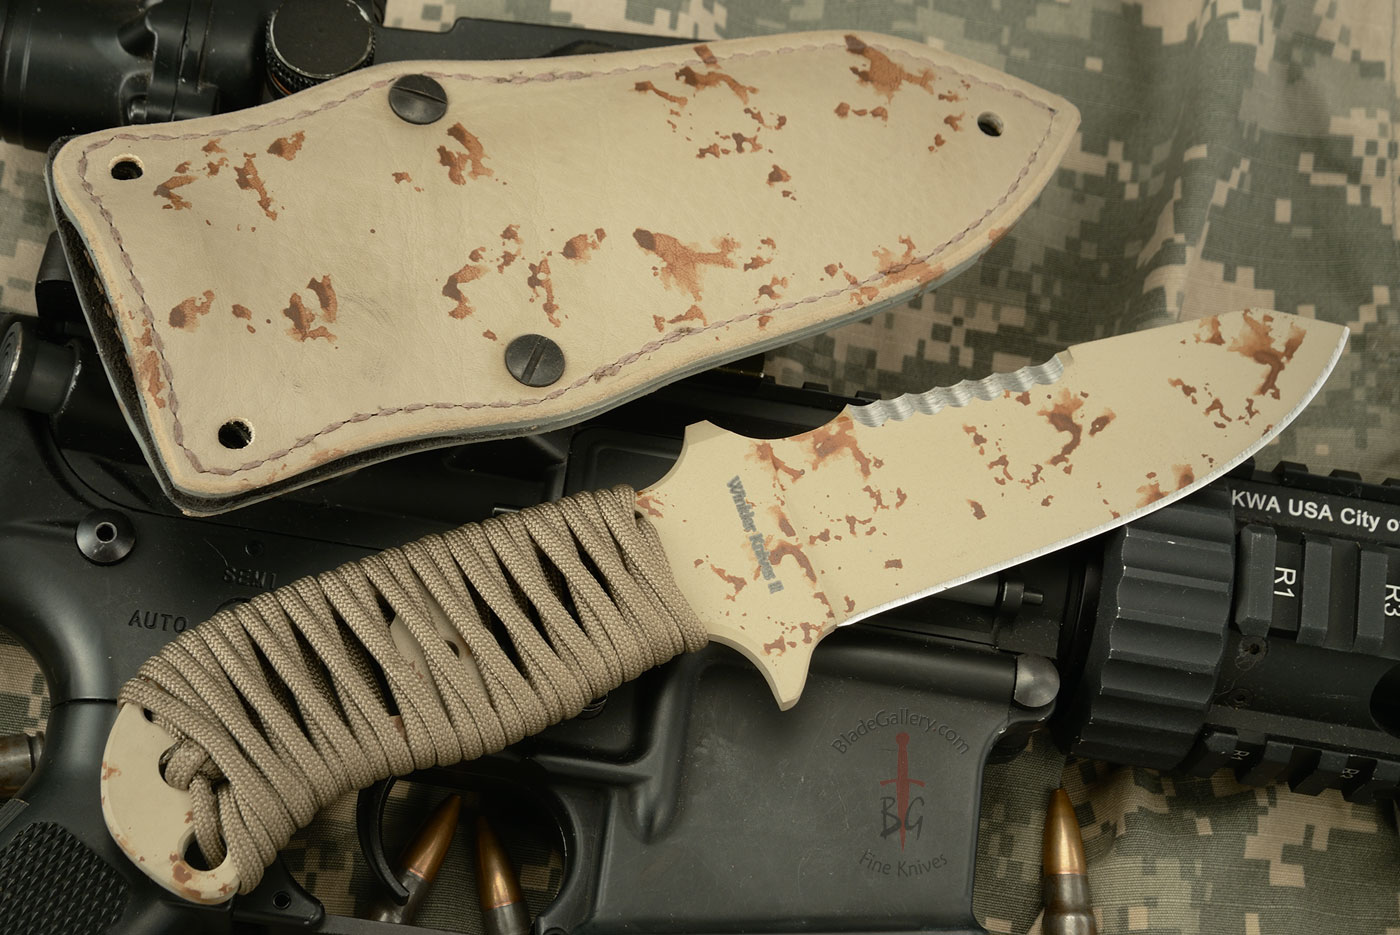 Utility Knife with Cord Wrap and Desert Camo KG Finish